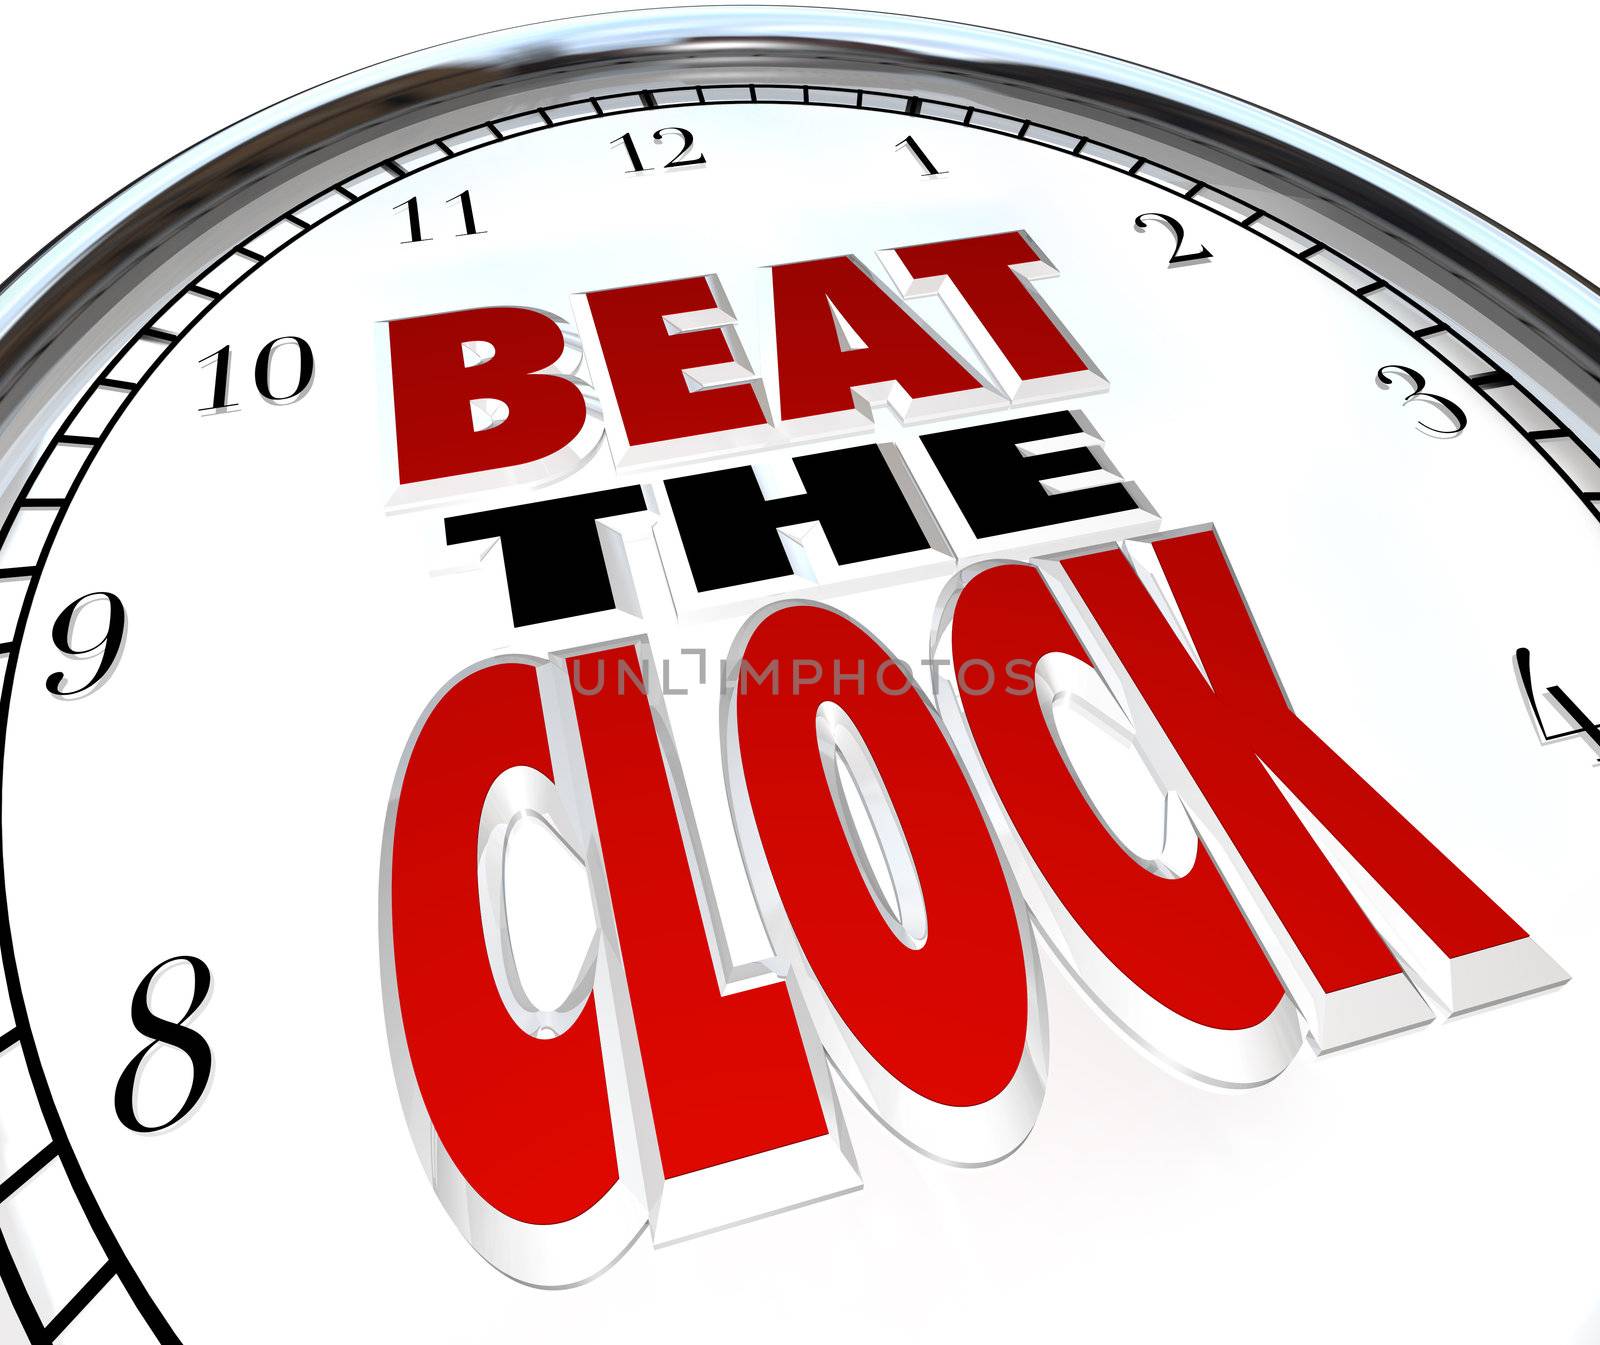 The words Beat the Clock on a clock face to illustrate the need to complete a task before a deadline or be the first to finish before the countdown and win a competition